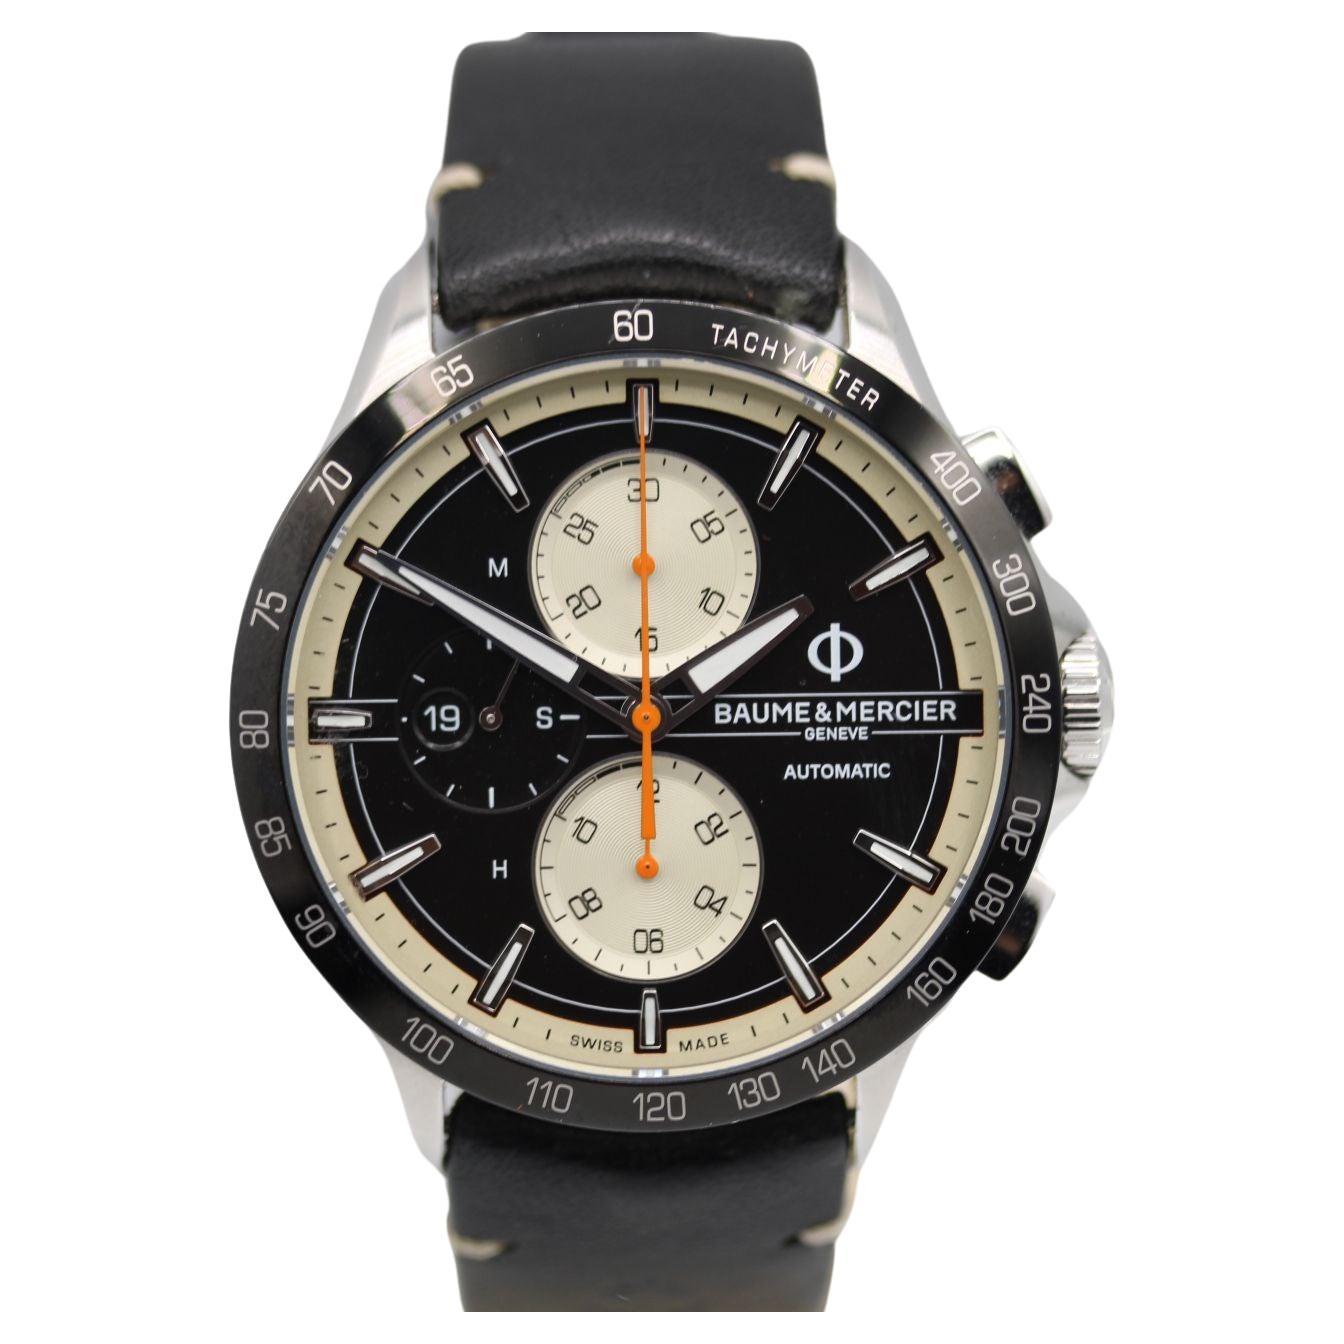 Are Baume & Mercier watches any good?